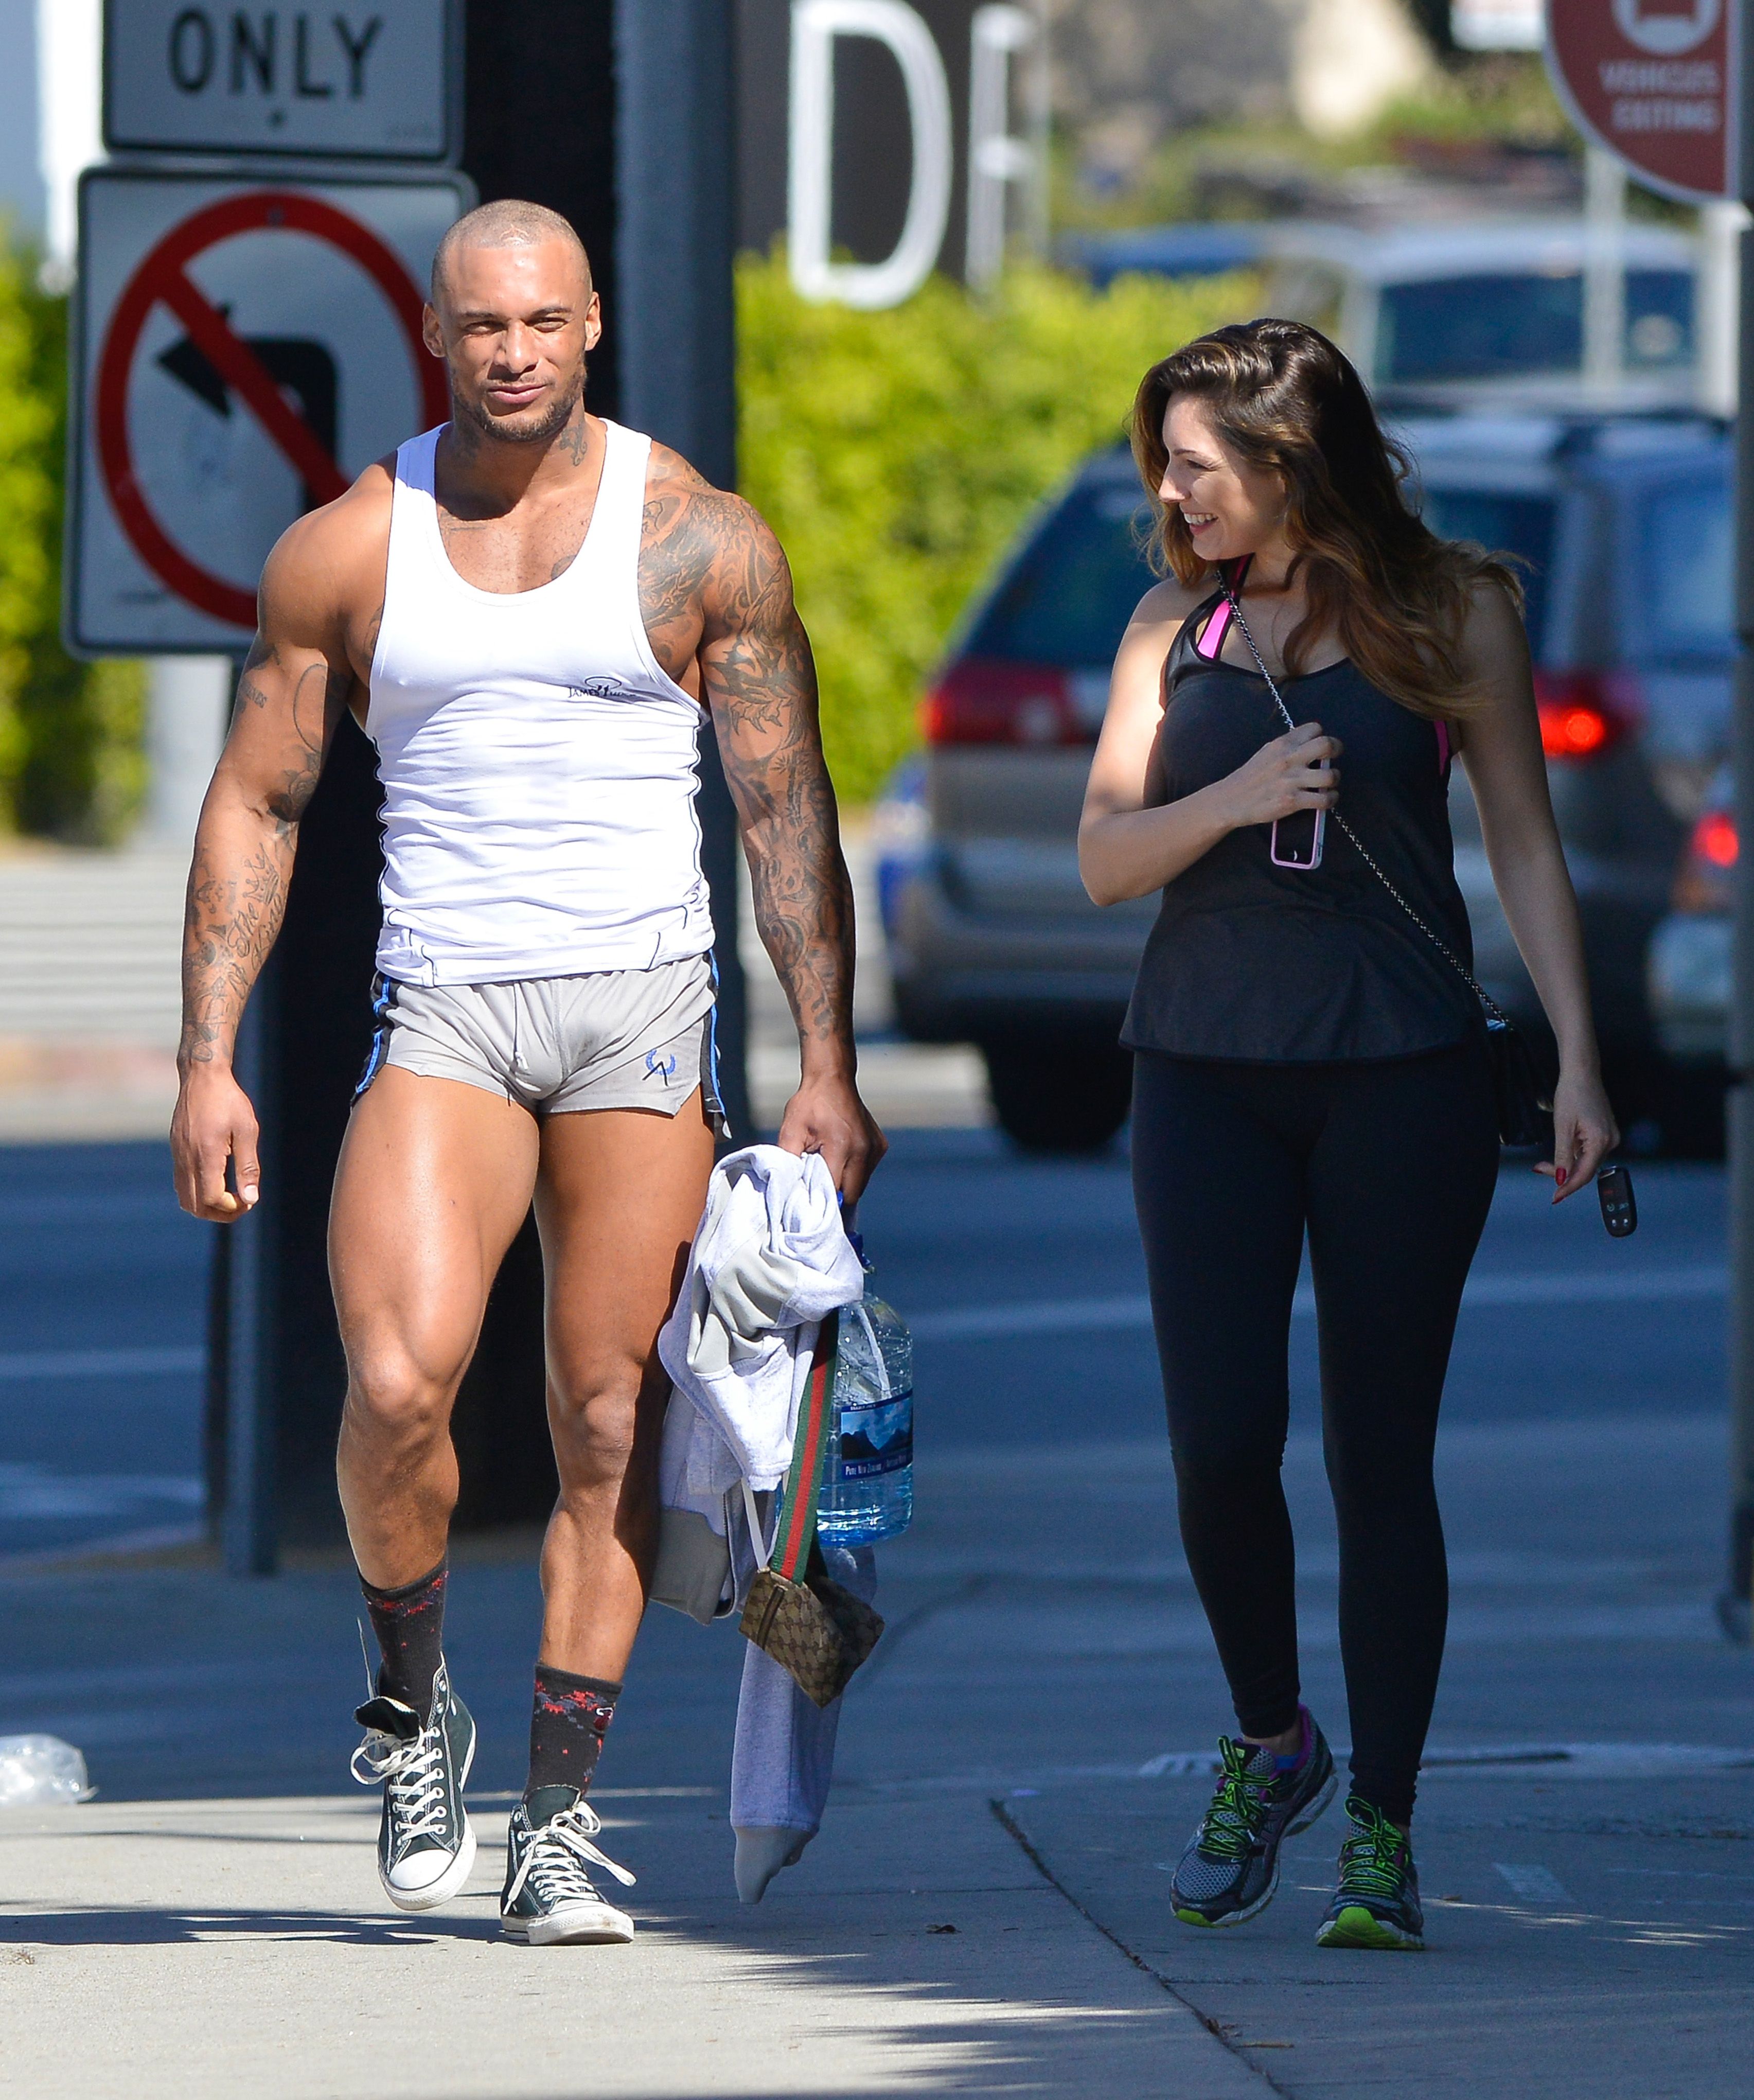 Sexy Celebrity Legs - Hot Guys in Shorts